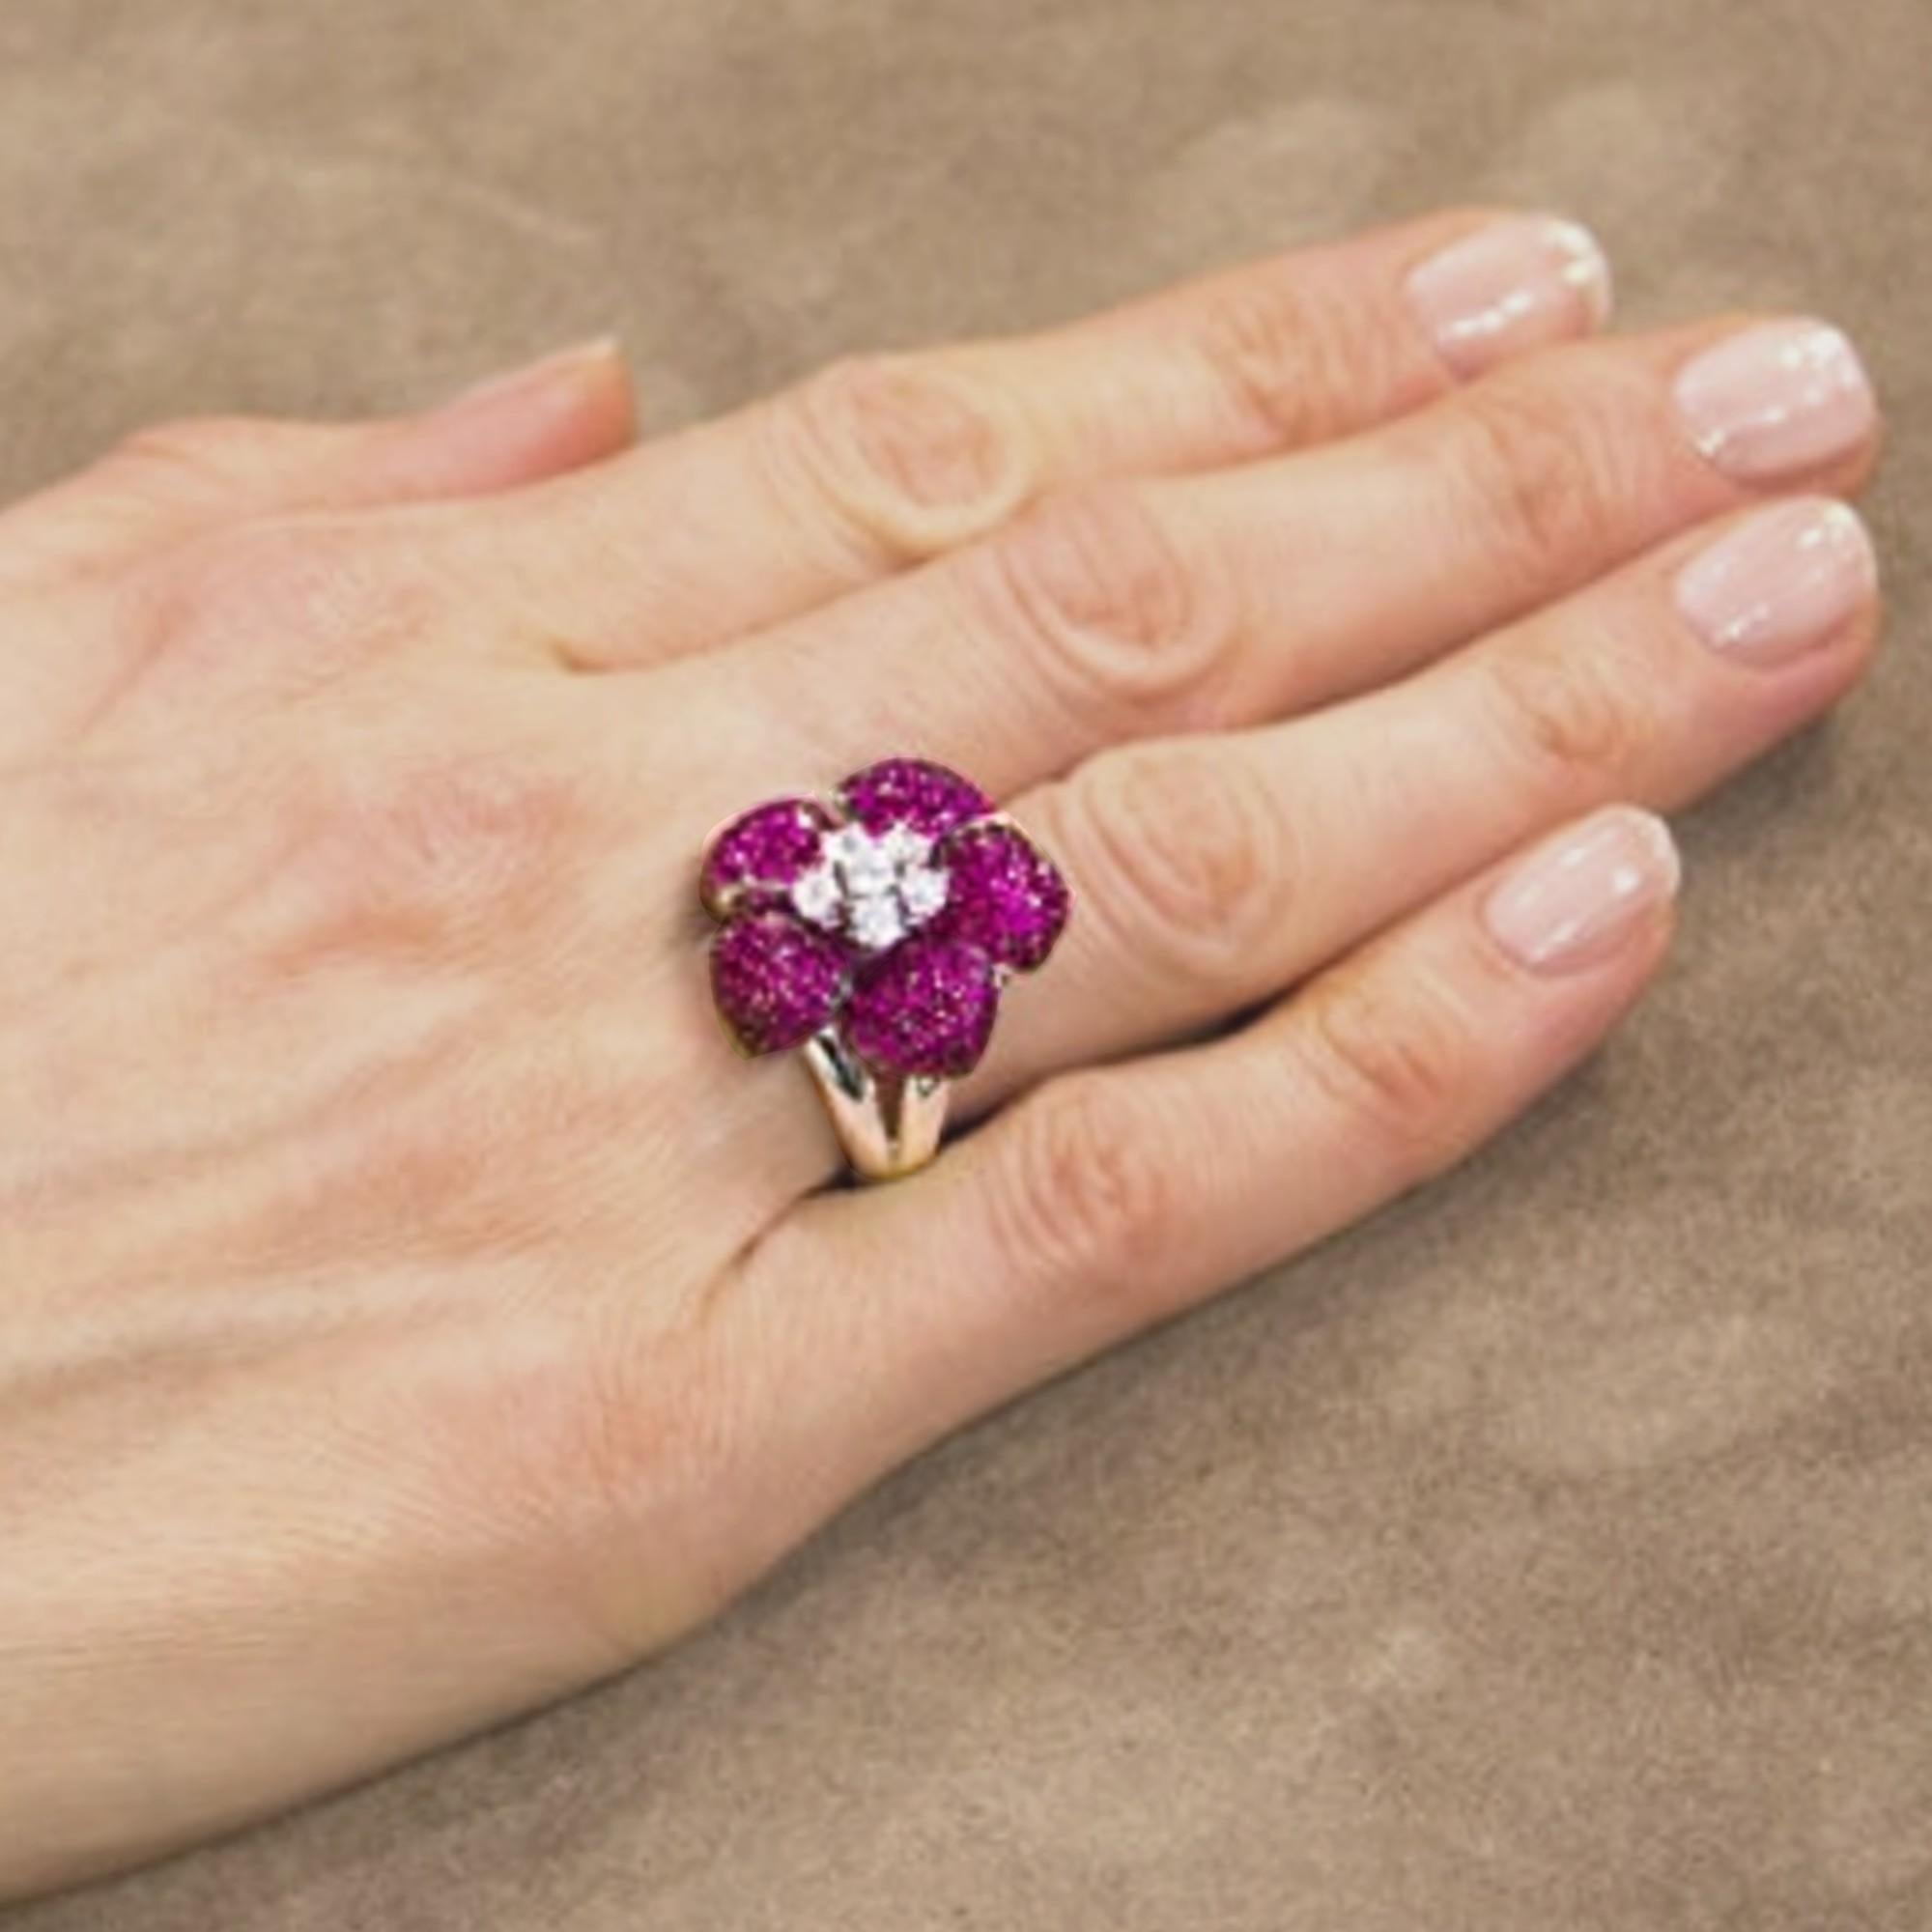 A dazzling flower ring hand made in Italy in 18 karat white gold, with petals encrusted with a beautiful ruby pavé with dark rhodium setting, surrounding six prong-set diamonds in the center.
This ring holds 0.61 carats of diamonds and 211 pieces